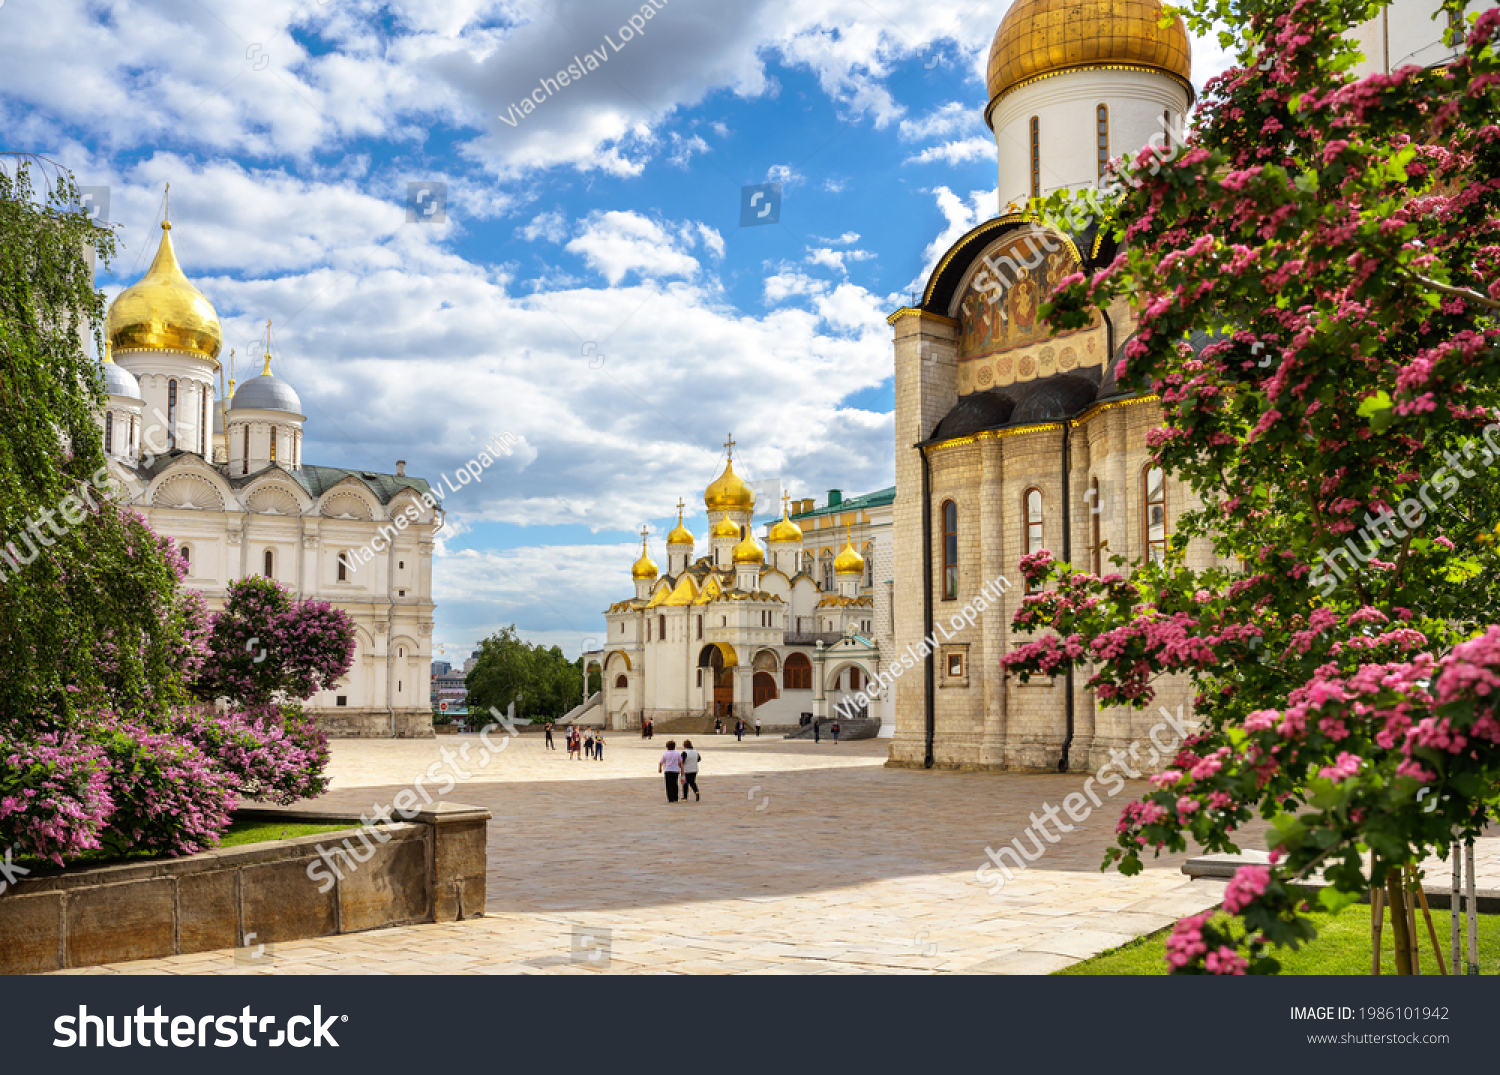 Inside Moscow Kremlin, Russia. Nice panorama of Dormition, Archangel and Annunciation cathedrals, old Russian churches in Moscow city center. Theme of bloom, landmarks and travel in summer Moscow. #1986101942